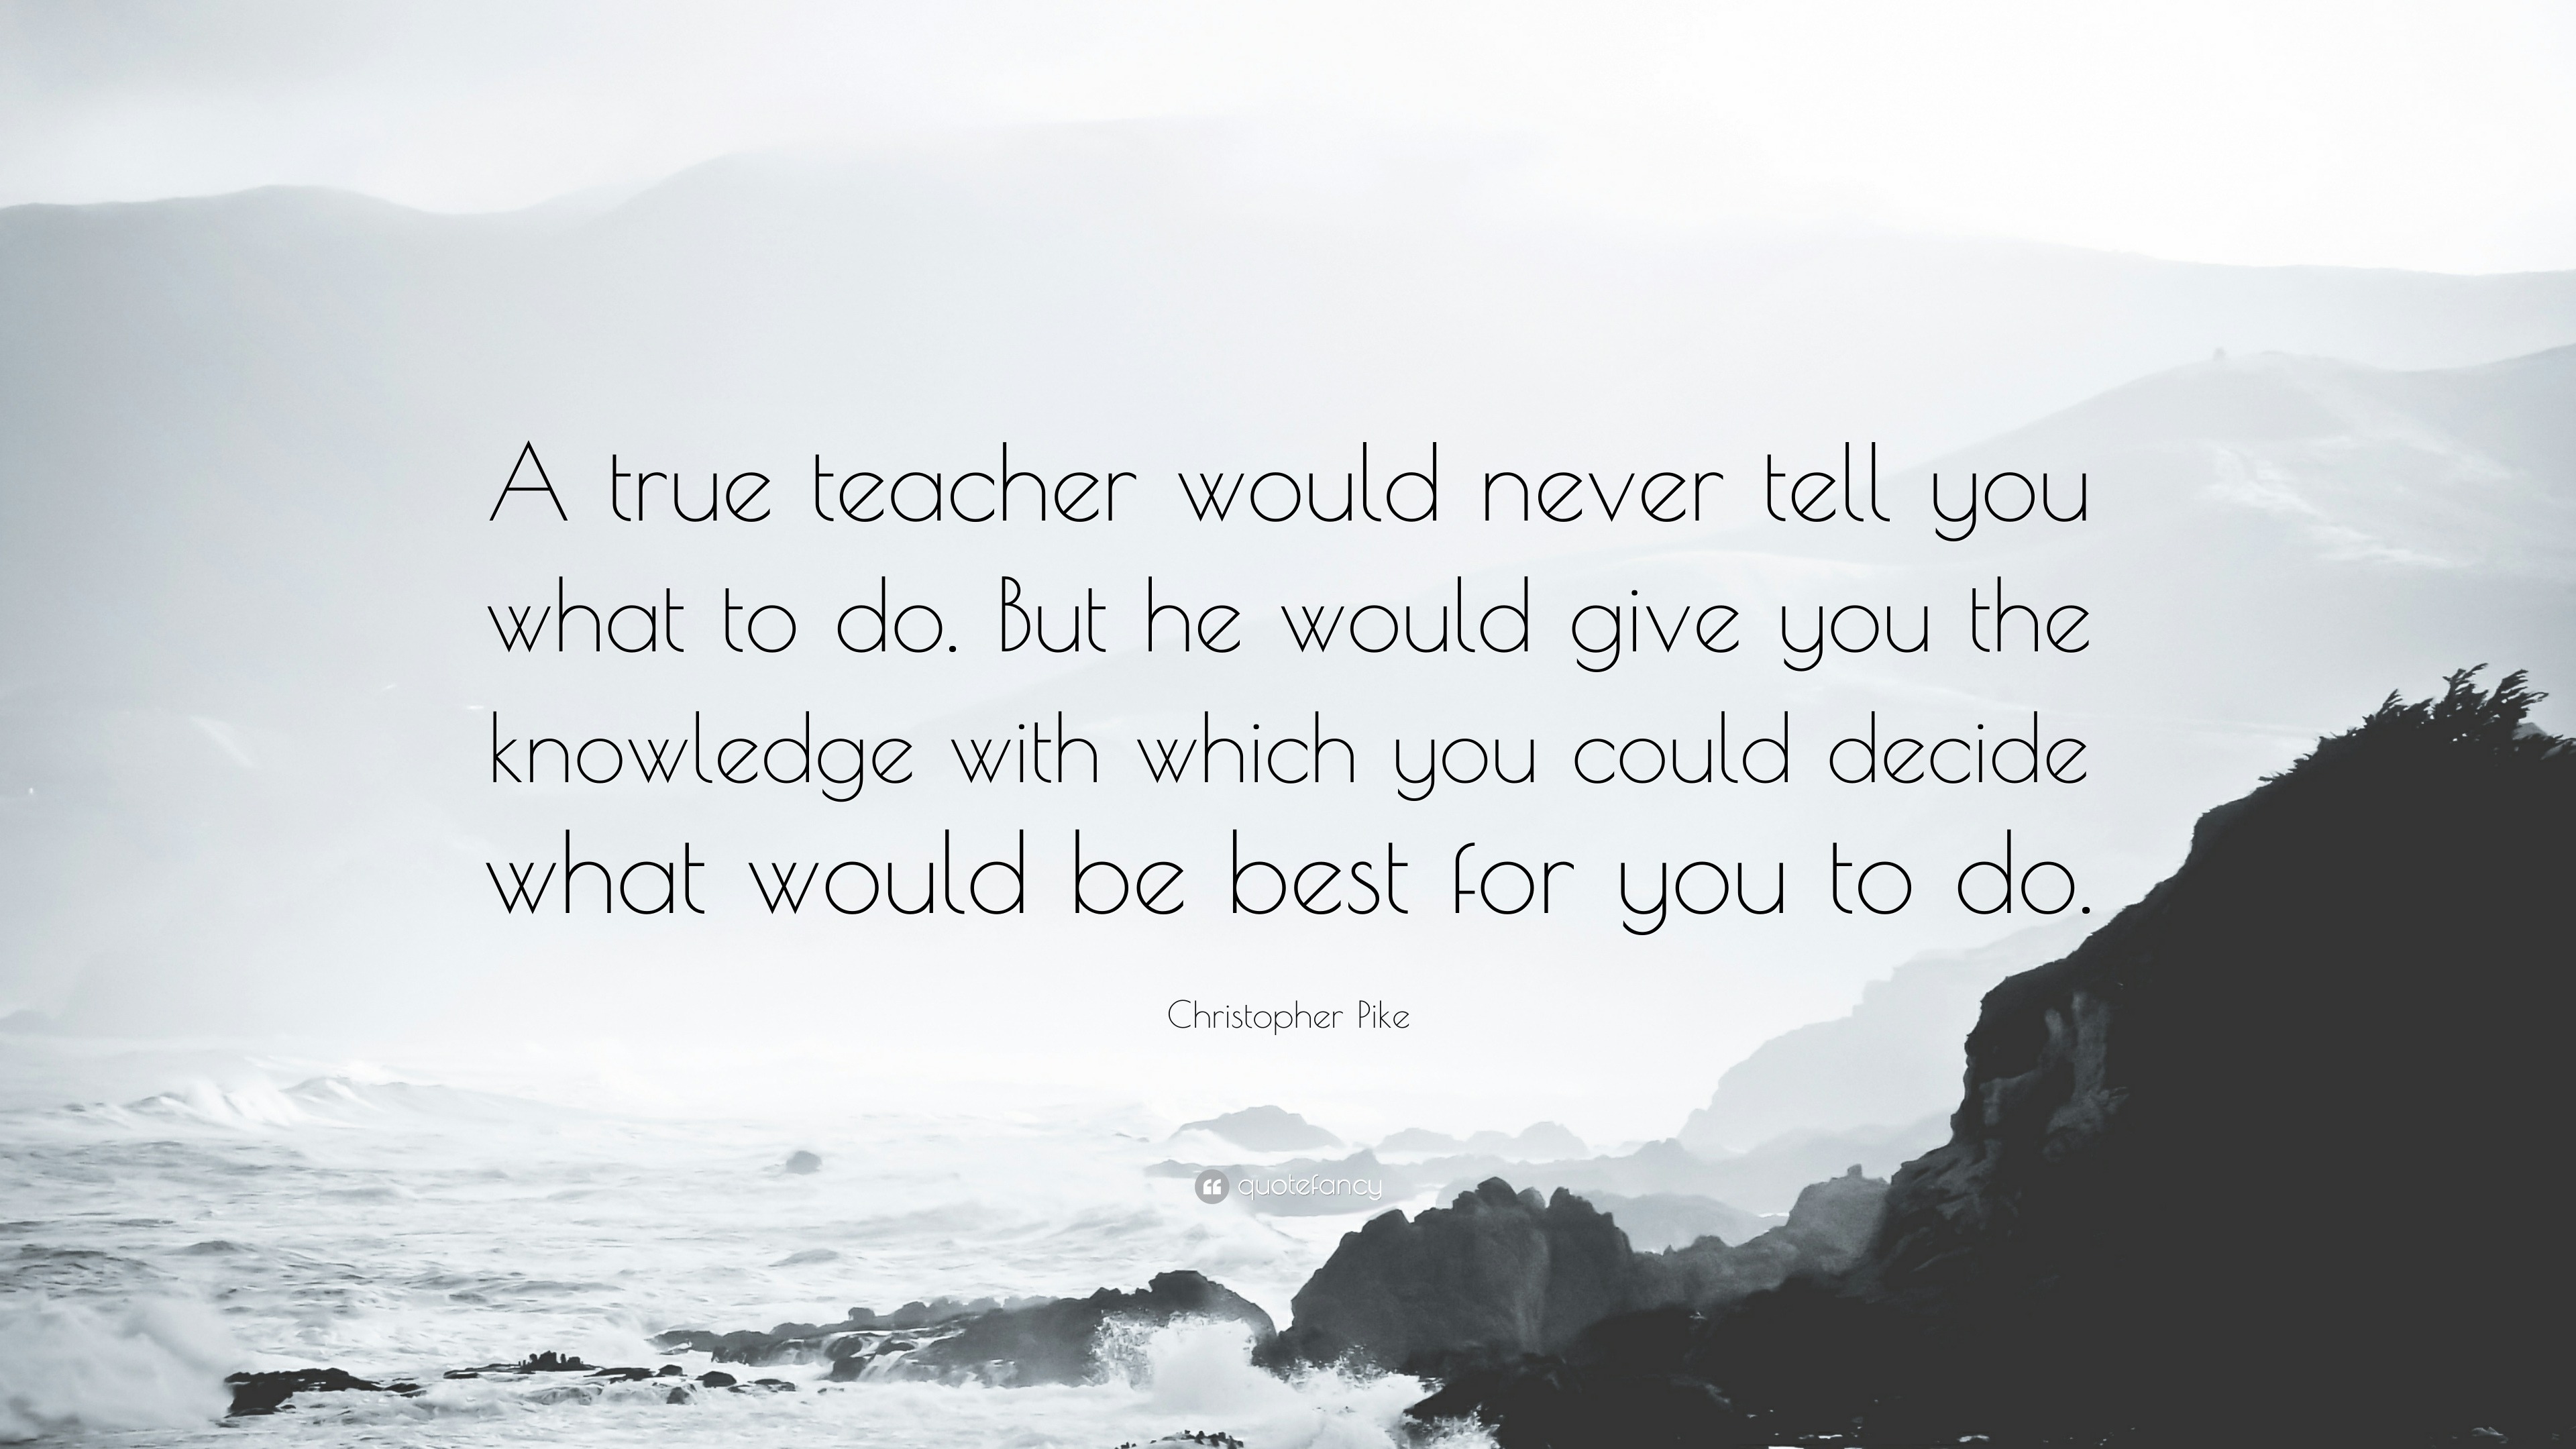 Christopher Pike Quote: “A true teacher would never tell you what to do ...